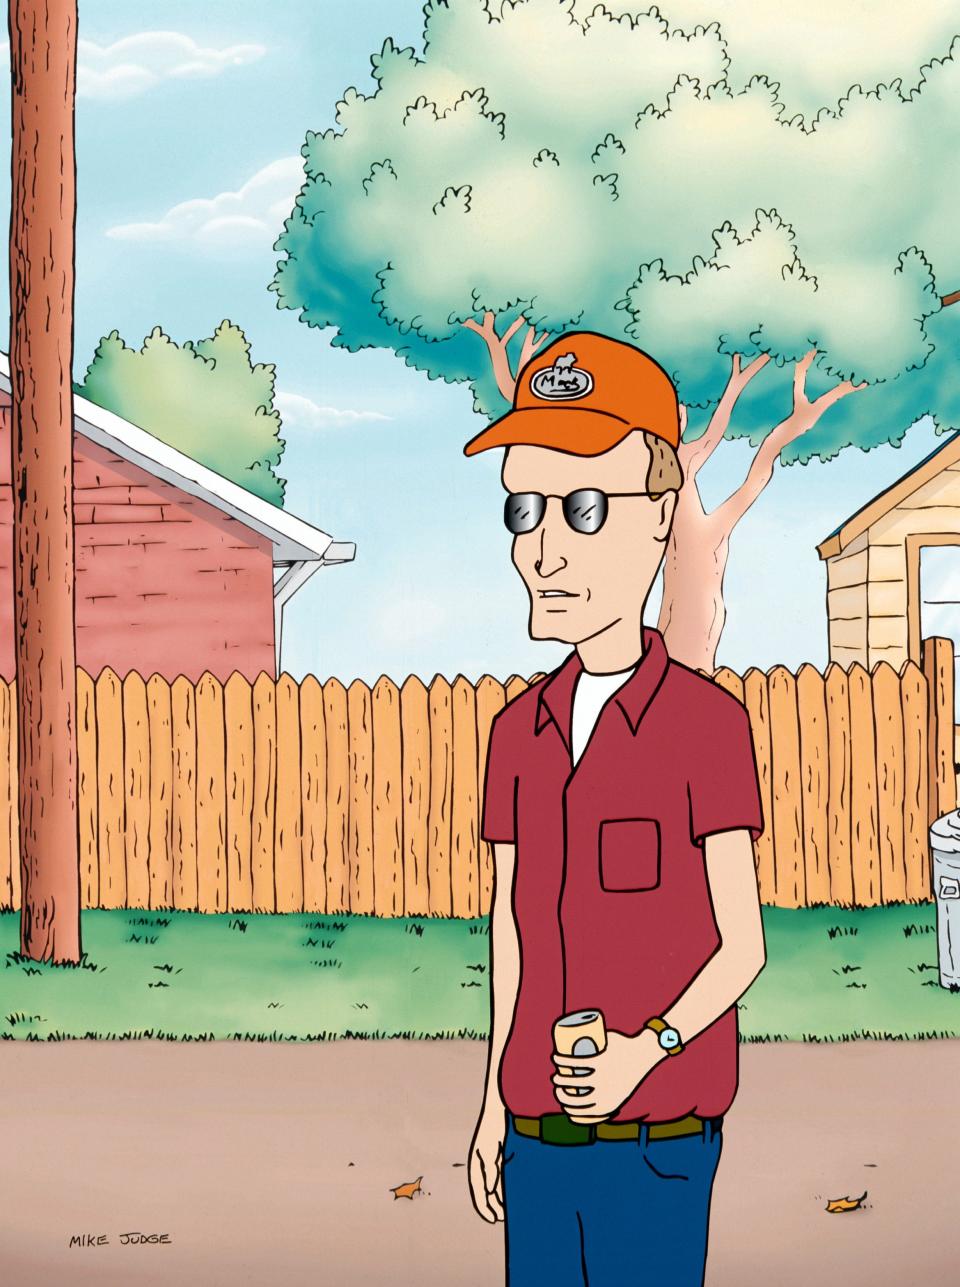 Dale on "King Of The Hill." Voice actor Johnny Hardwick has died.